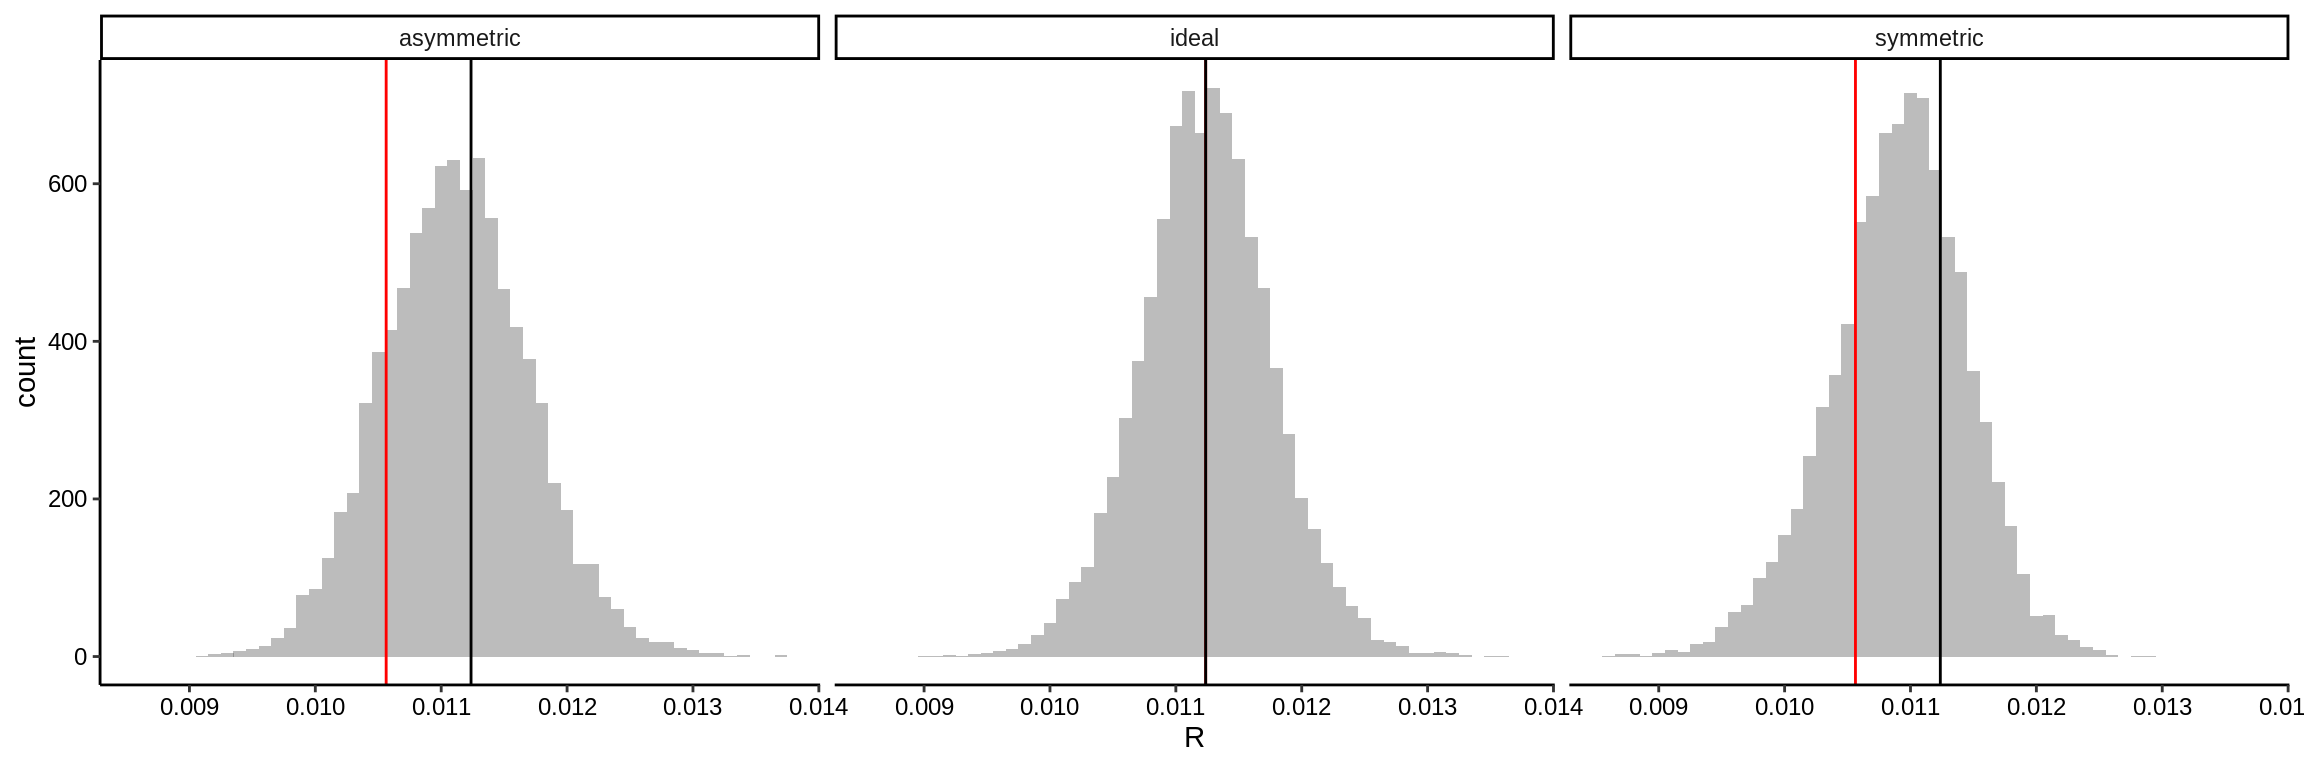 Histograms comparing input and output $R$ values for simulations of an ideal isotopically homogenous material, a gradual gradient in $R$ (symmetric gradient), and a sudden shift in $R$ (asymmetric gradient).